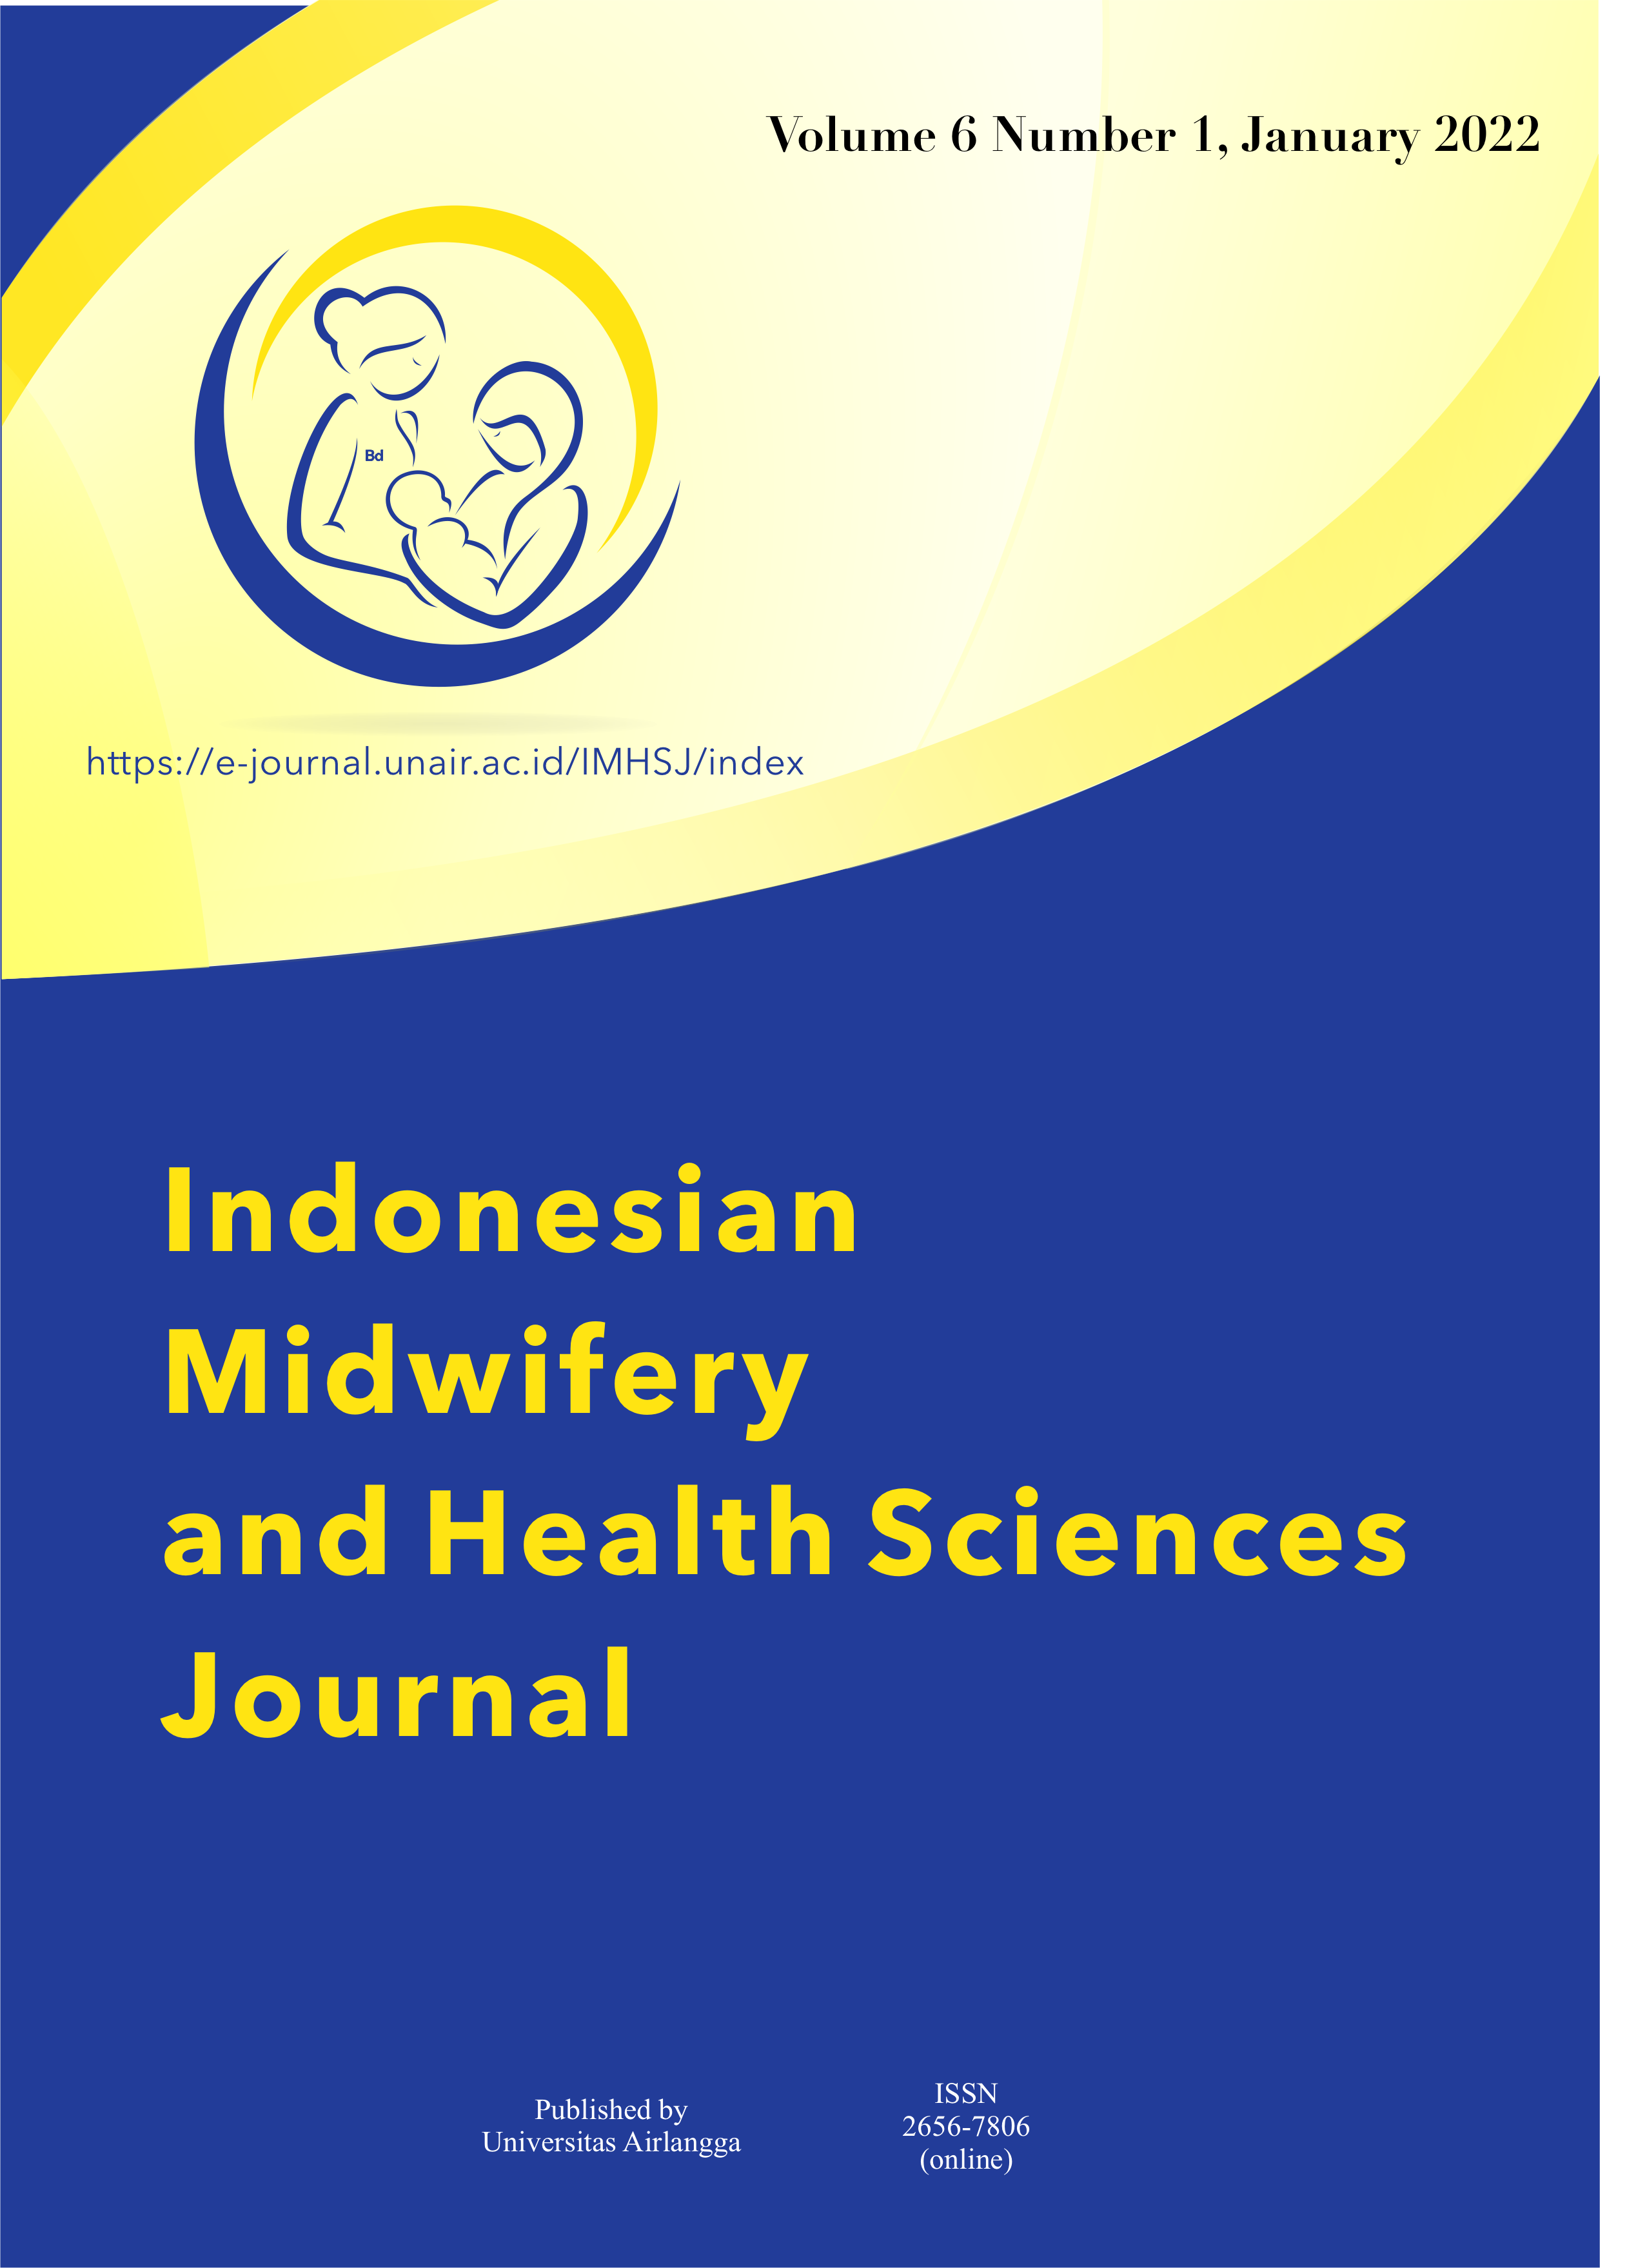 						View Vol. 6 No. 1 (2022): Indonesian Midwifery and Health Sciences Journal, January 2022
					